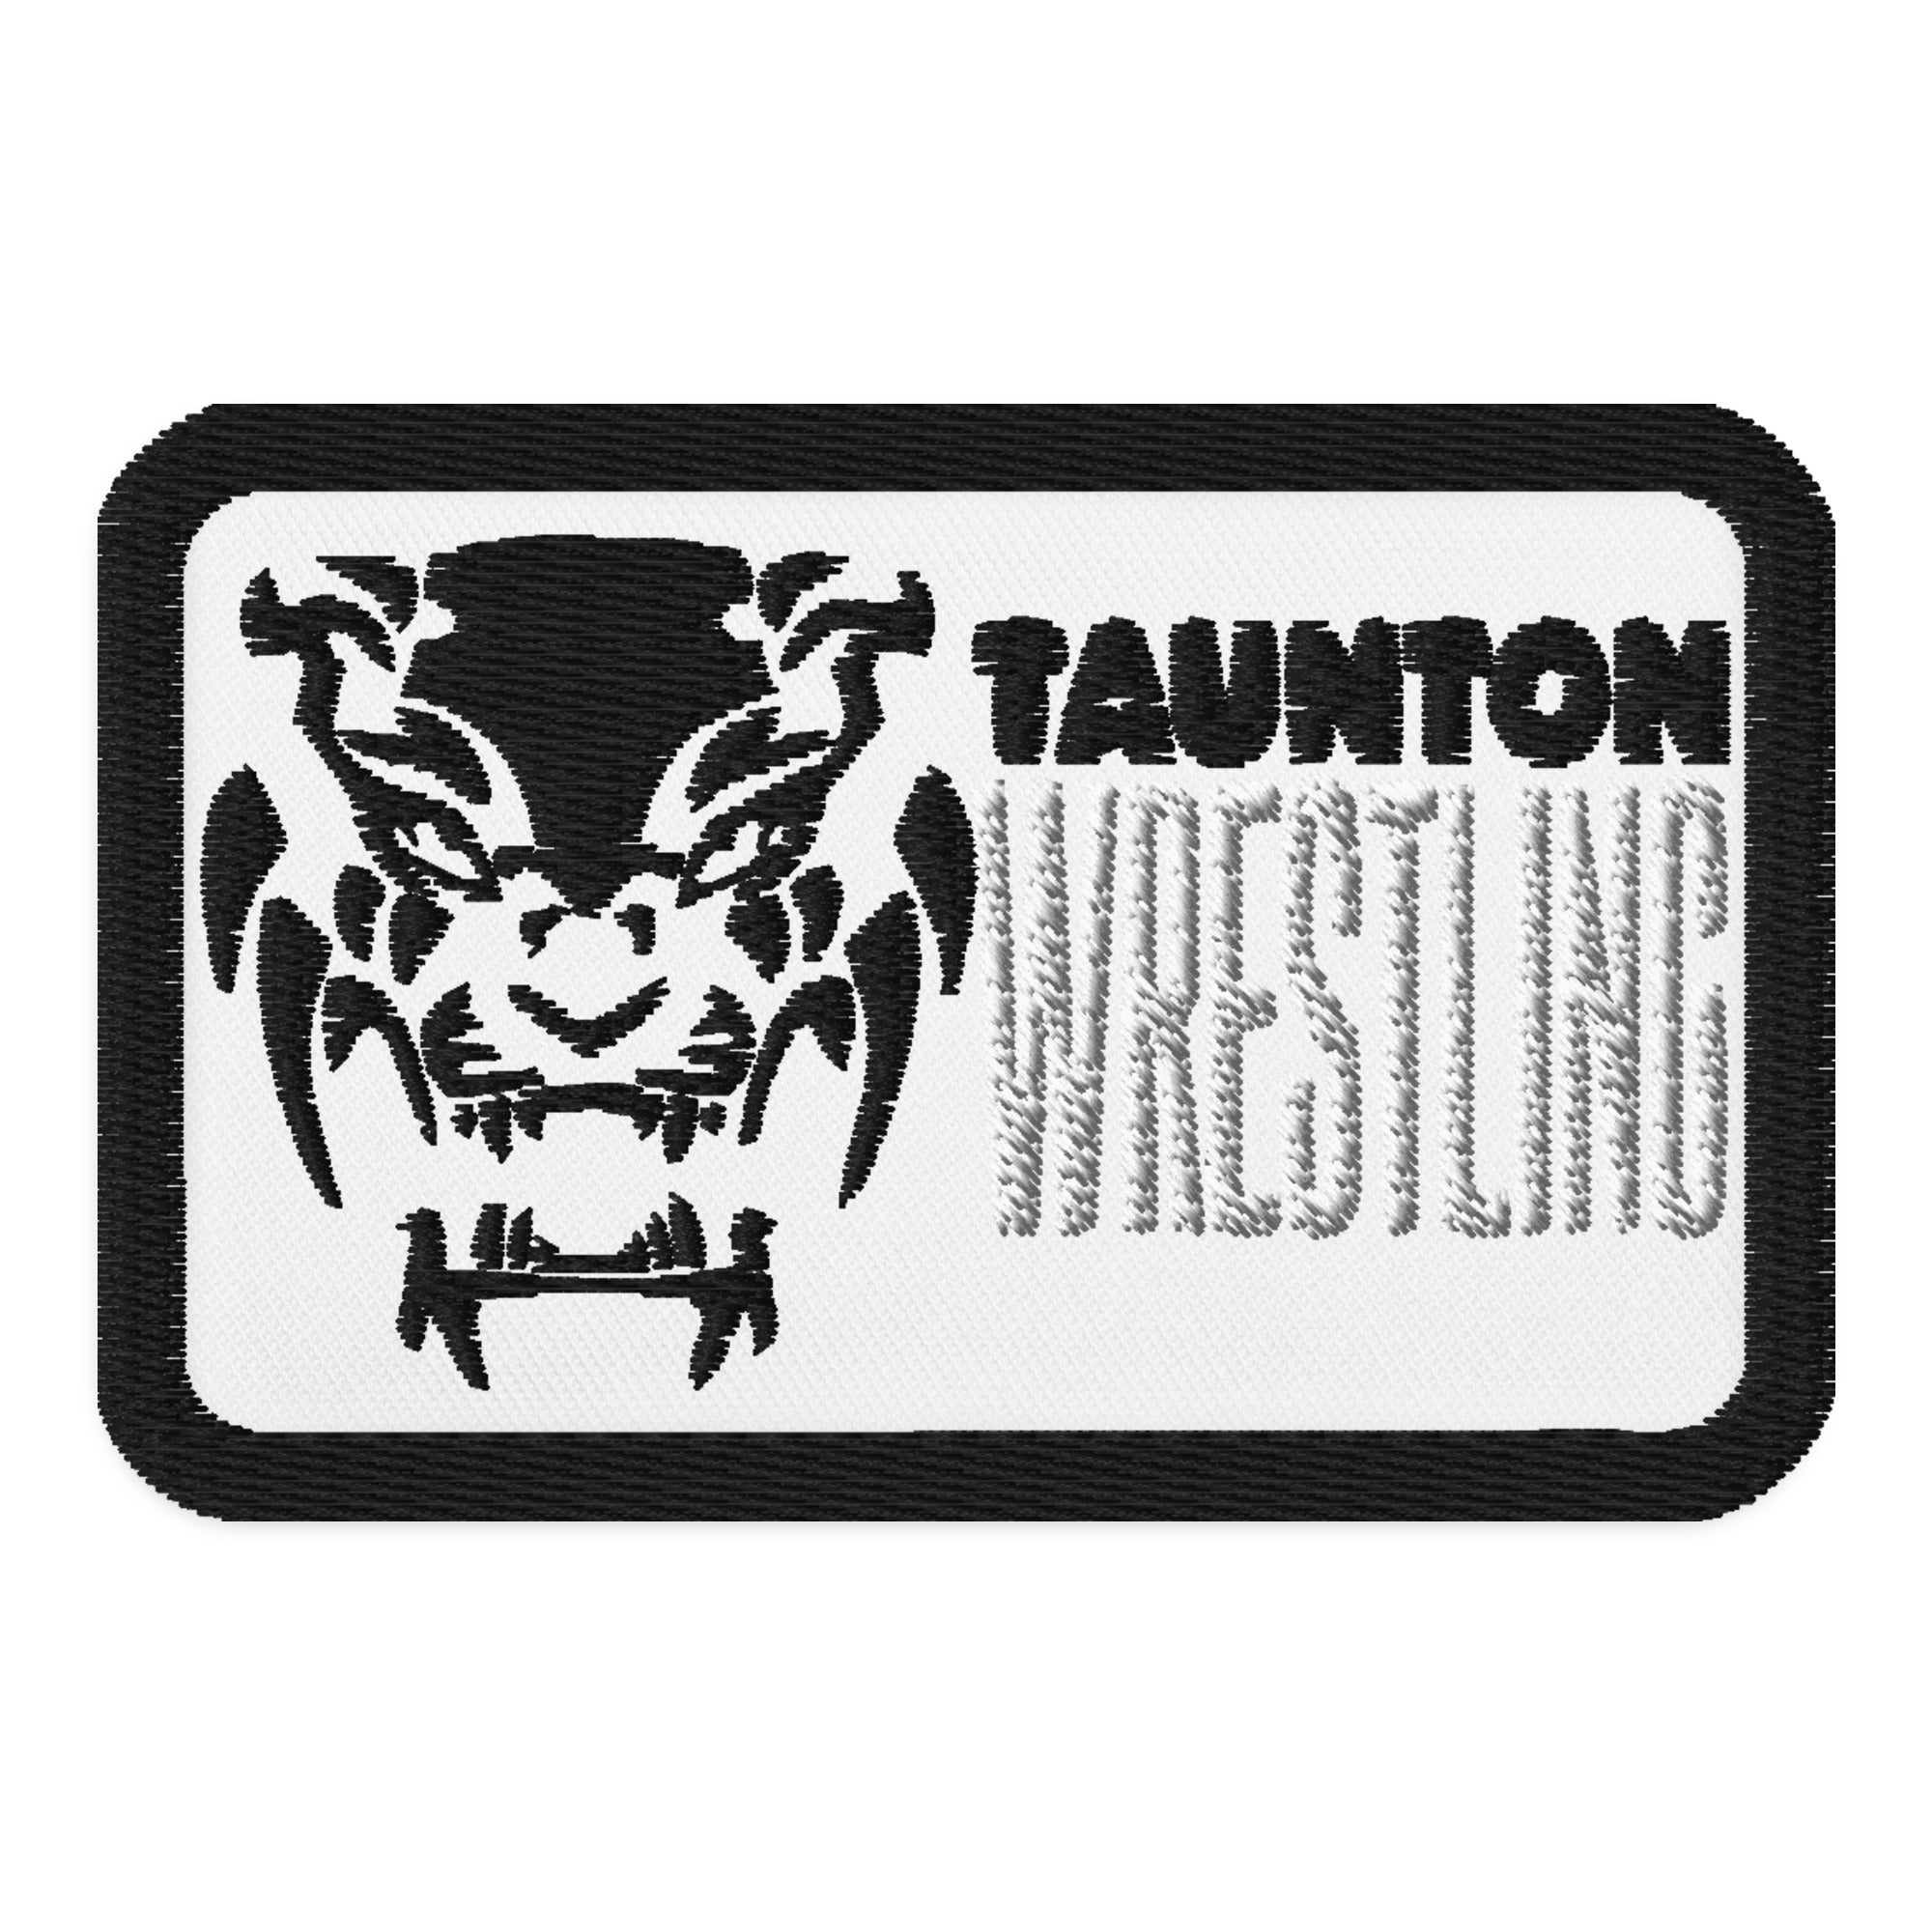 Taunton Wrestling, Embroidered Patches